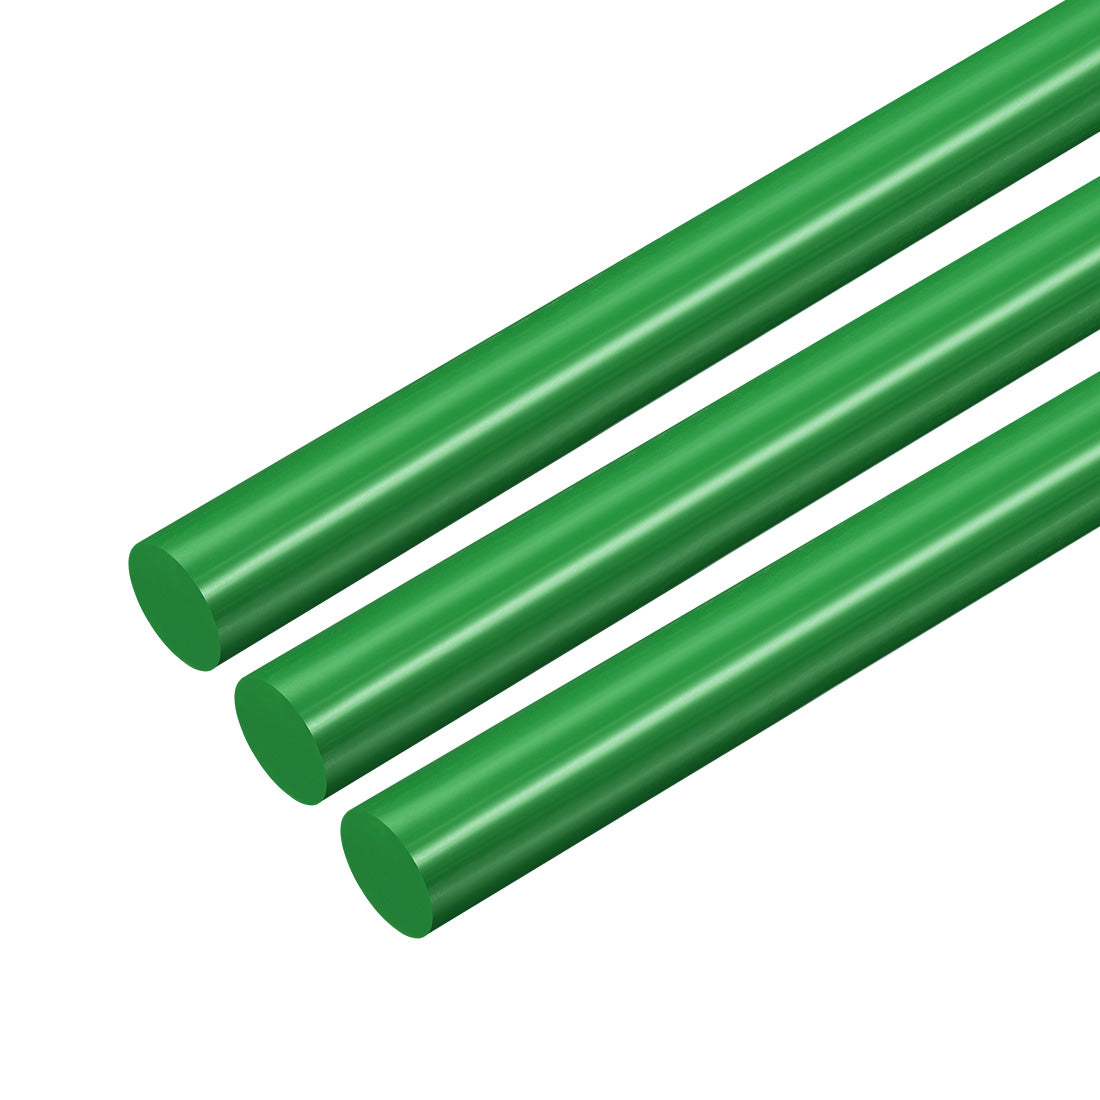 uxcell Uxcell Plastic Round Rod,10mm Dia 50cm Green Engineering Plastic Round Bar 3pcs